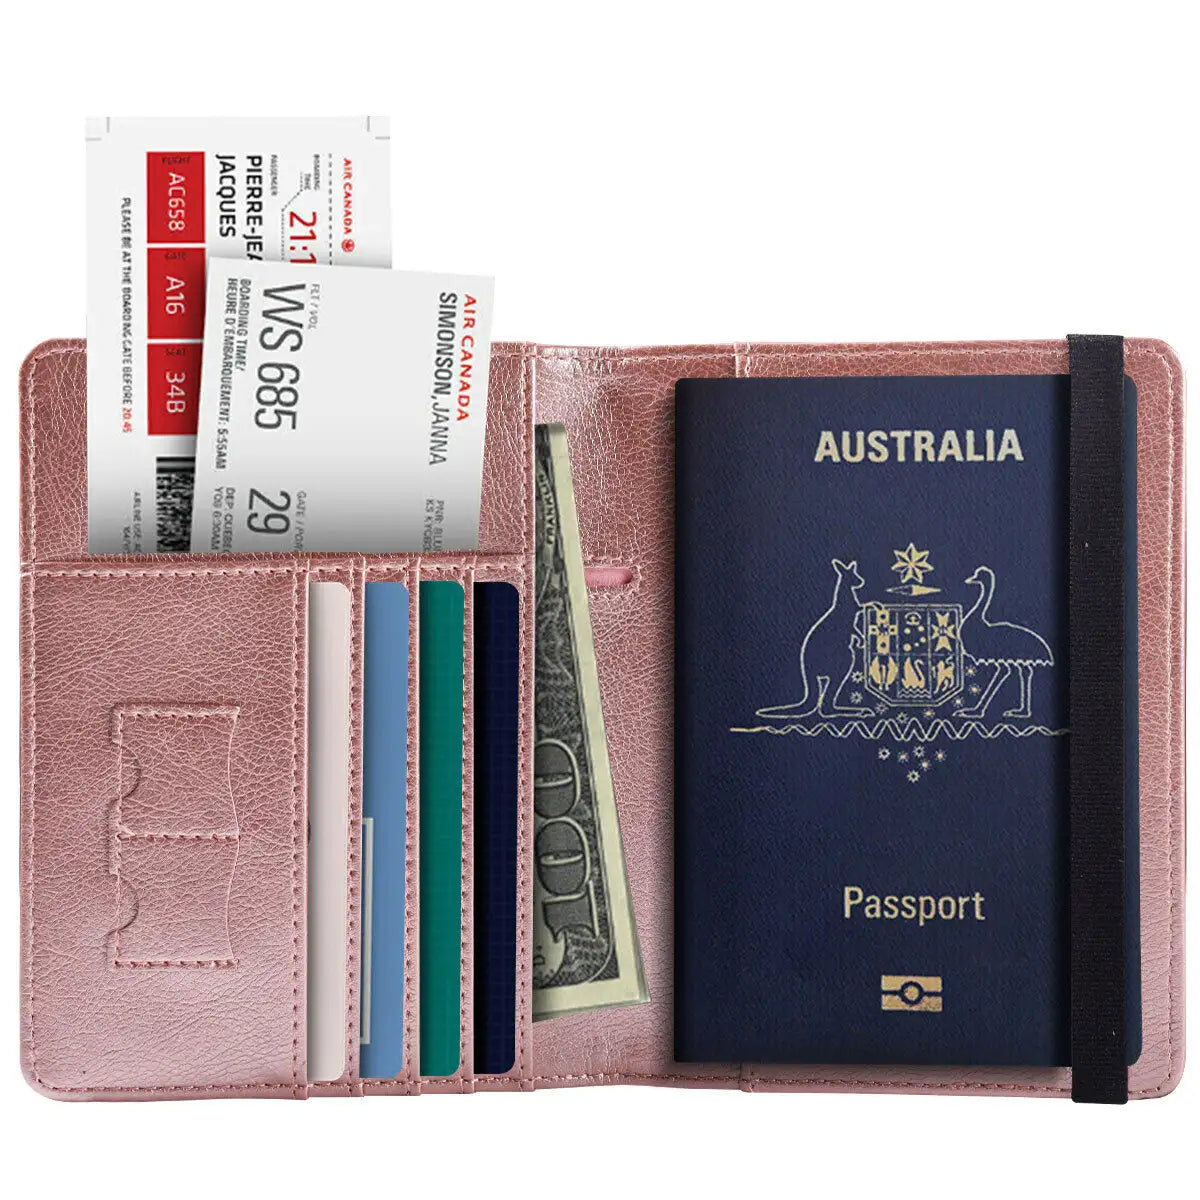 Rose Gold/Pink RFID travel wallet with boarding pass, cash, credit cards & passport